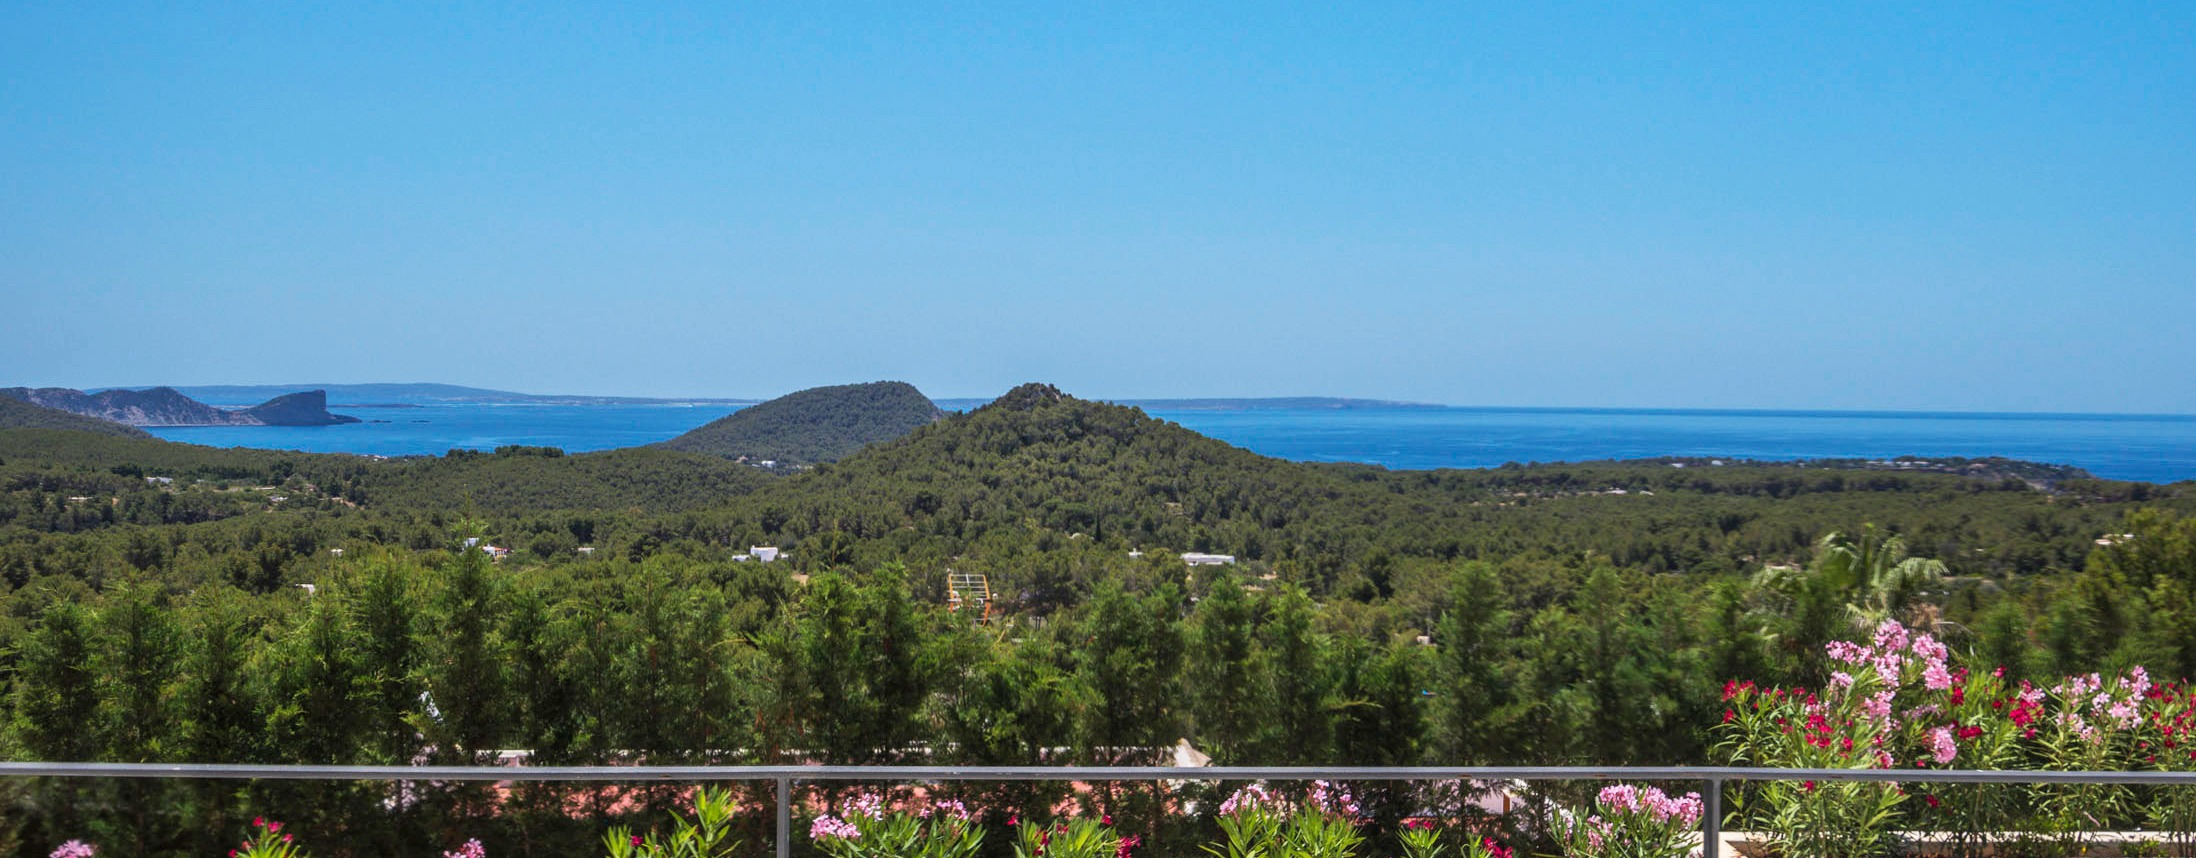 Sustainable living on Ibiza - How to protect nature on the island